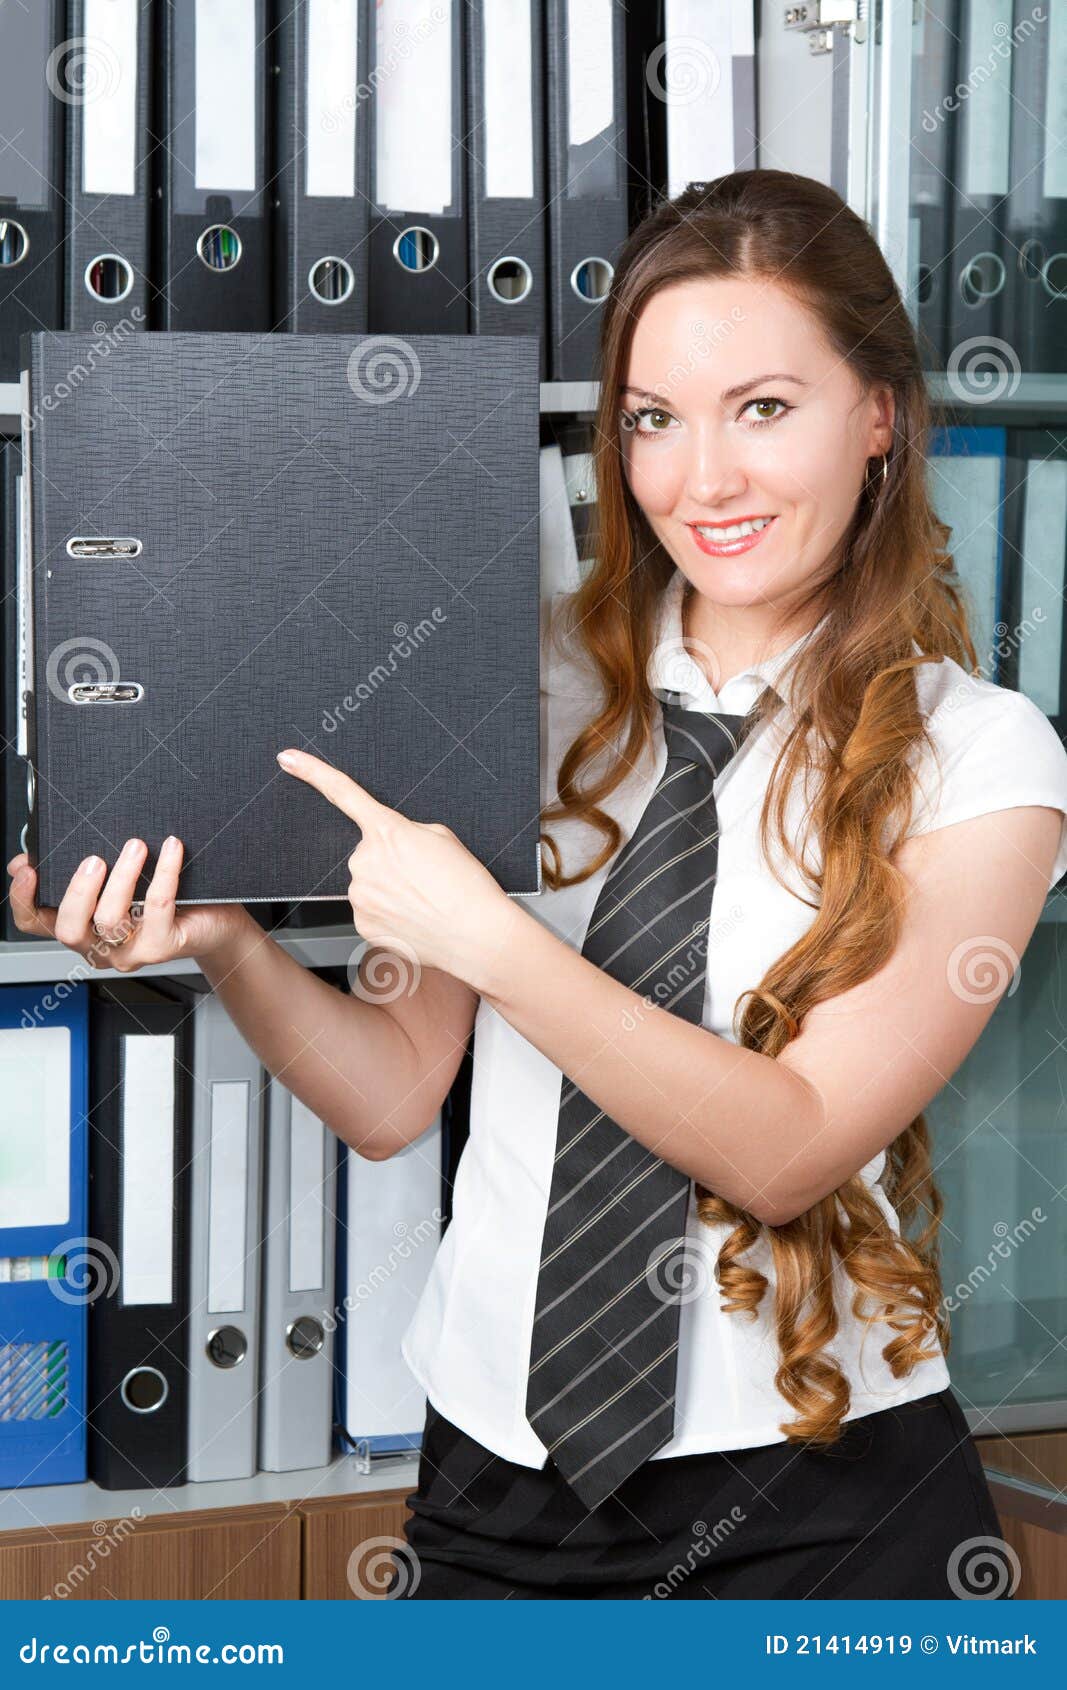 accountant points his finger at the folder